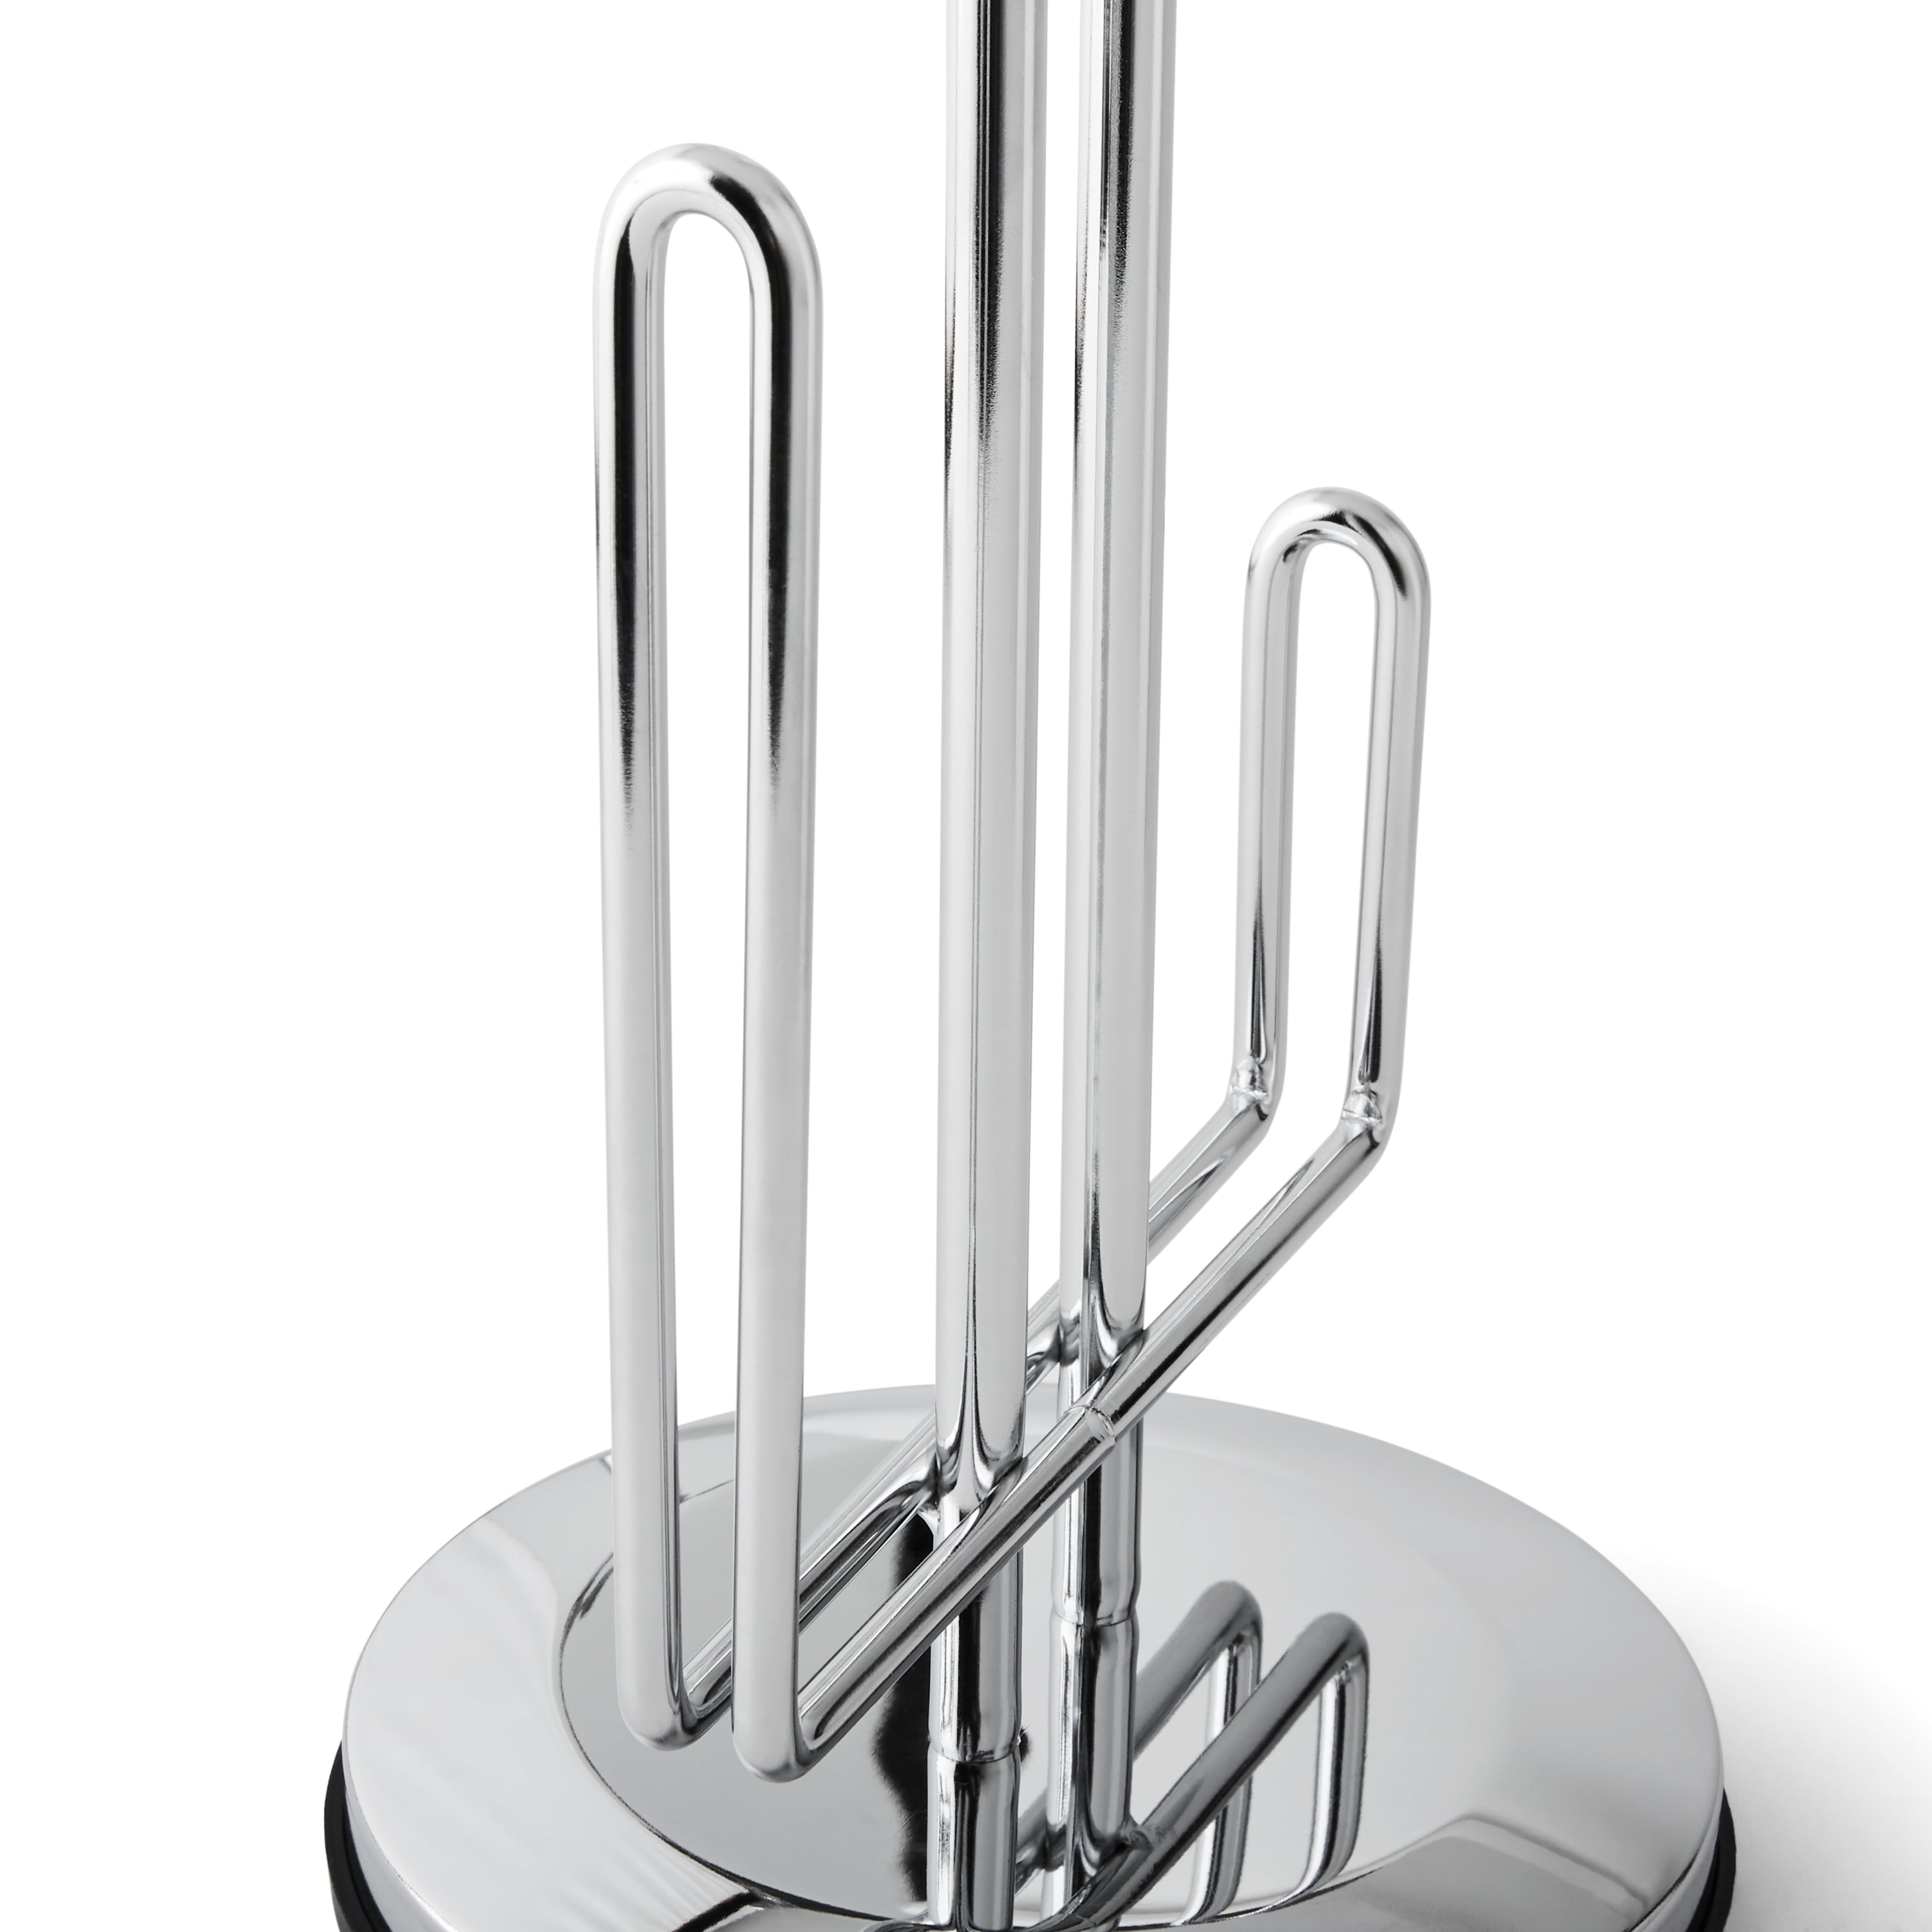 Mainstays Paper Towel Holder with Non-Slip Base, 13.7 inch, Chrome 